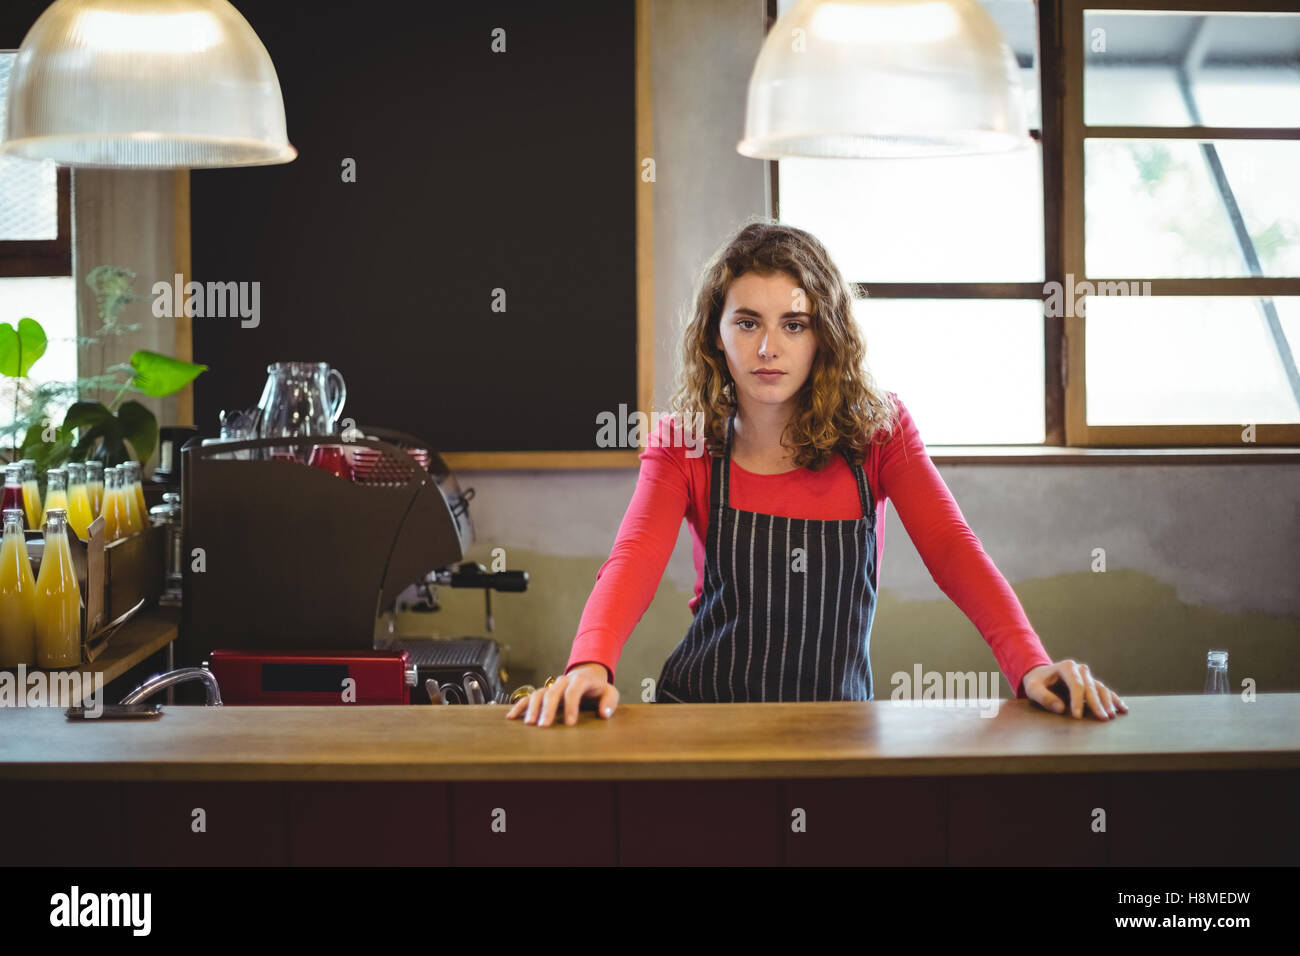 Confident waitress standing at counter in cafÃ© Stock Photo